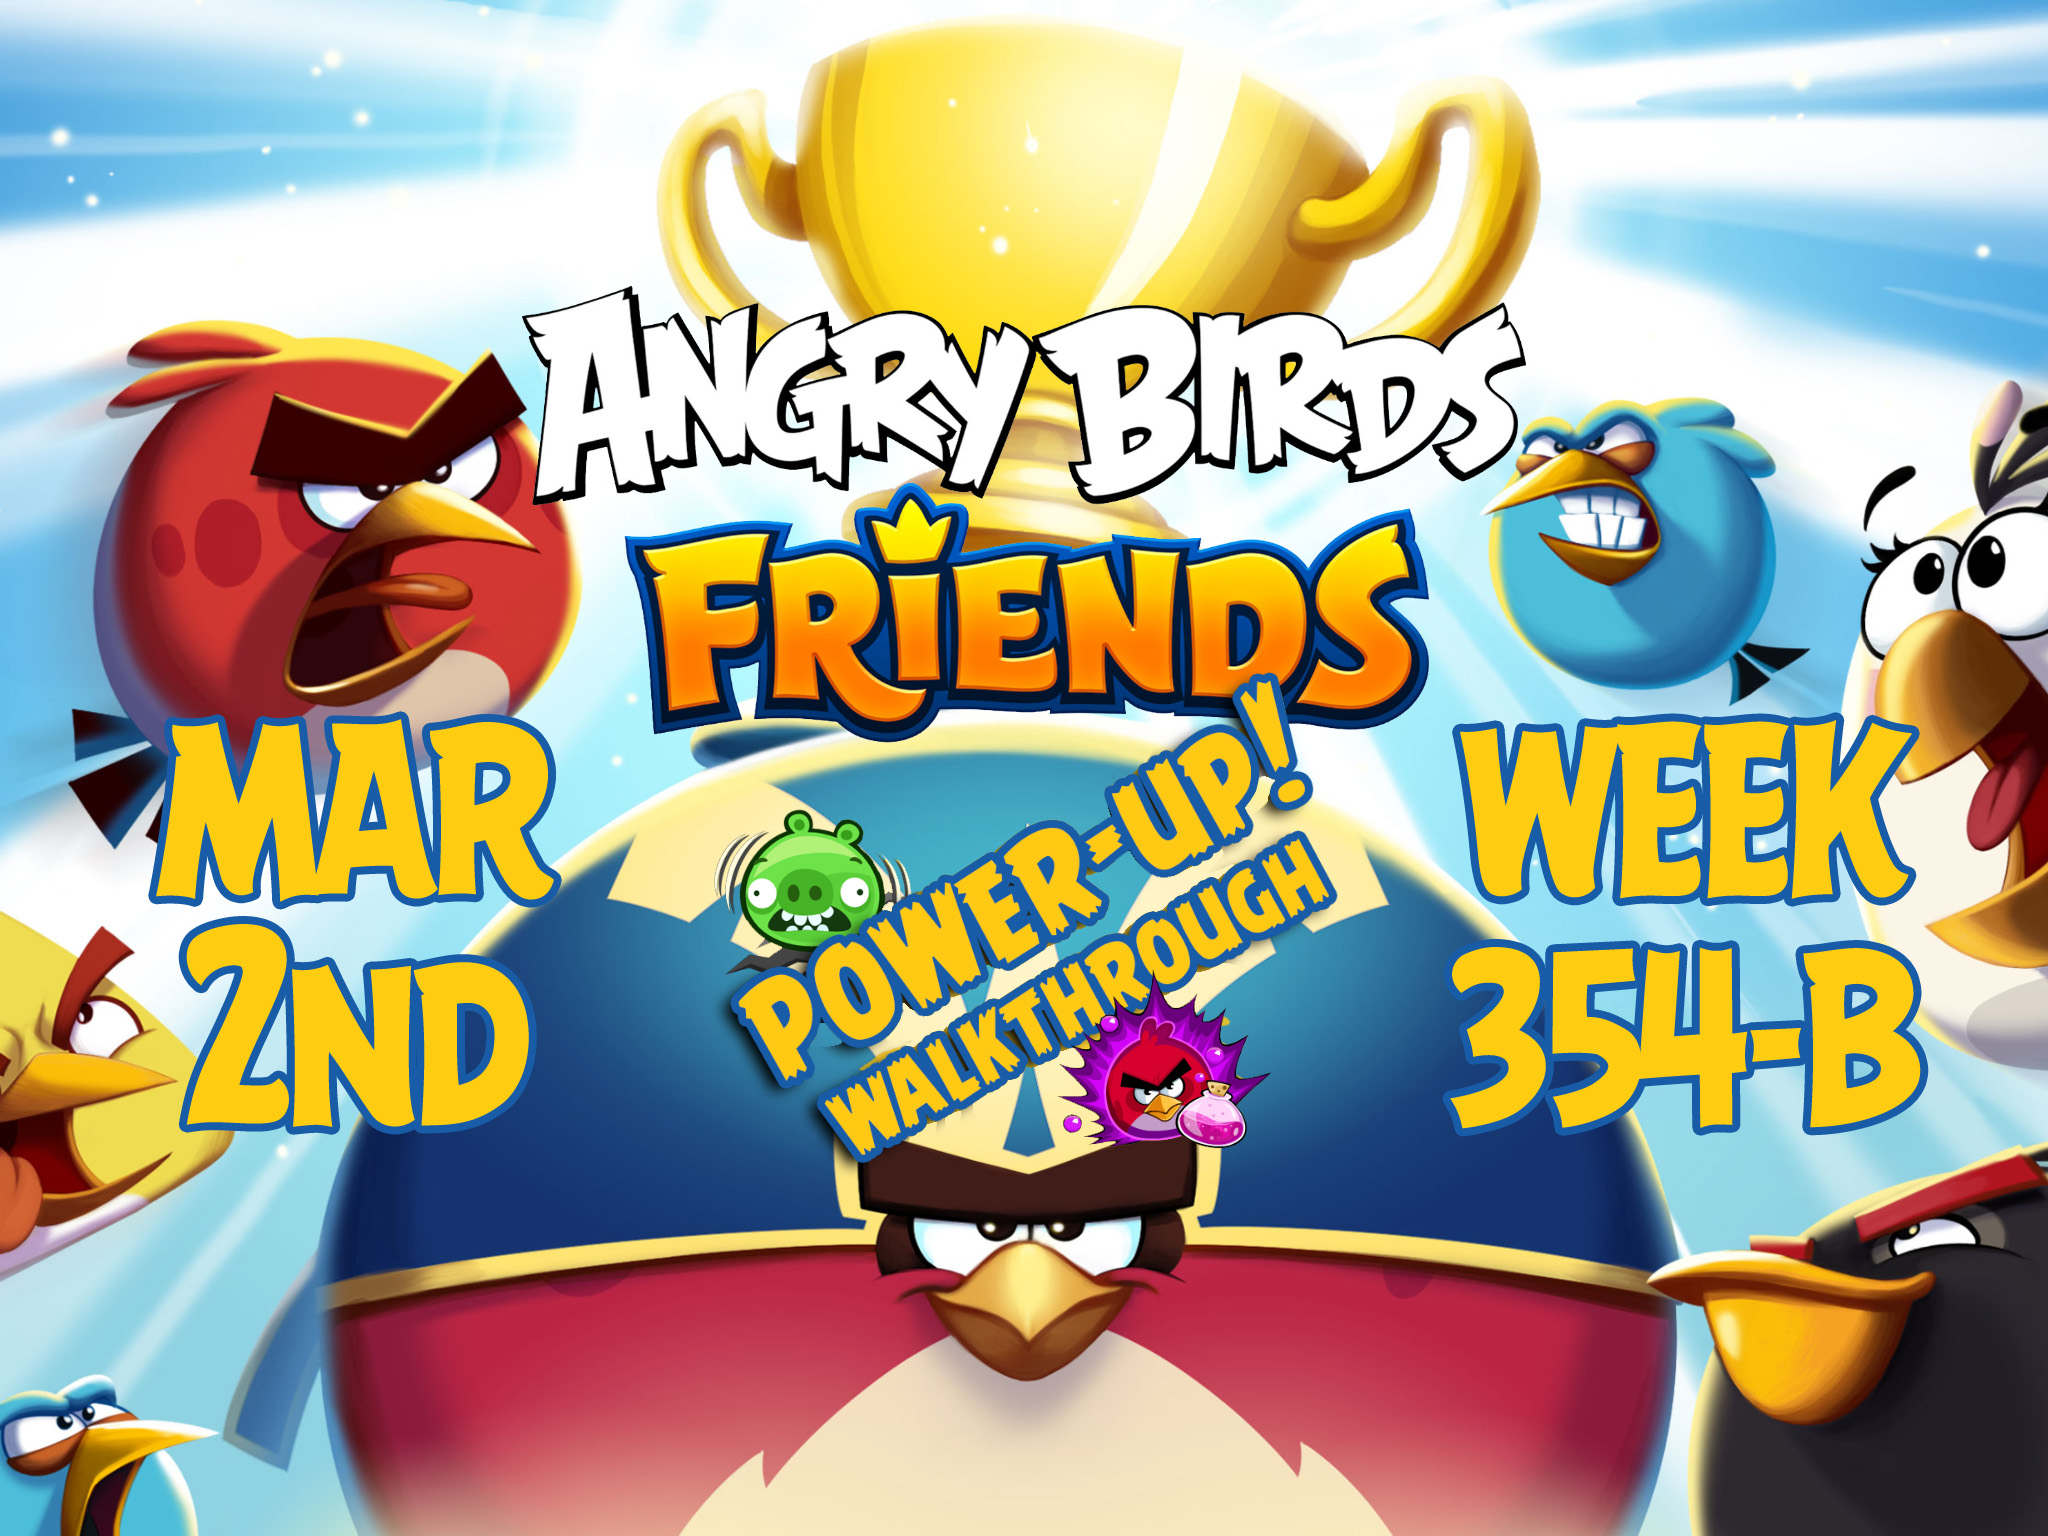 Angry-Birds-Friends-Tournament-Week-354-B-Feature-Image-PU